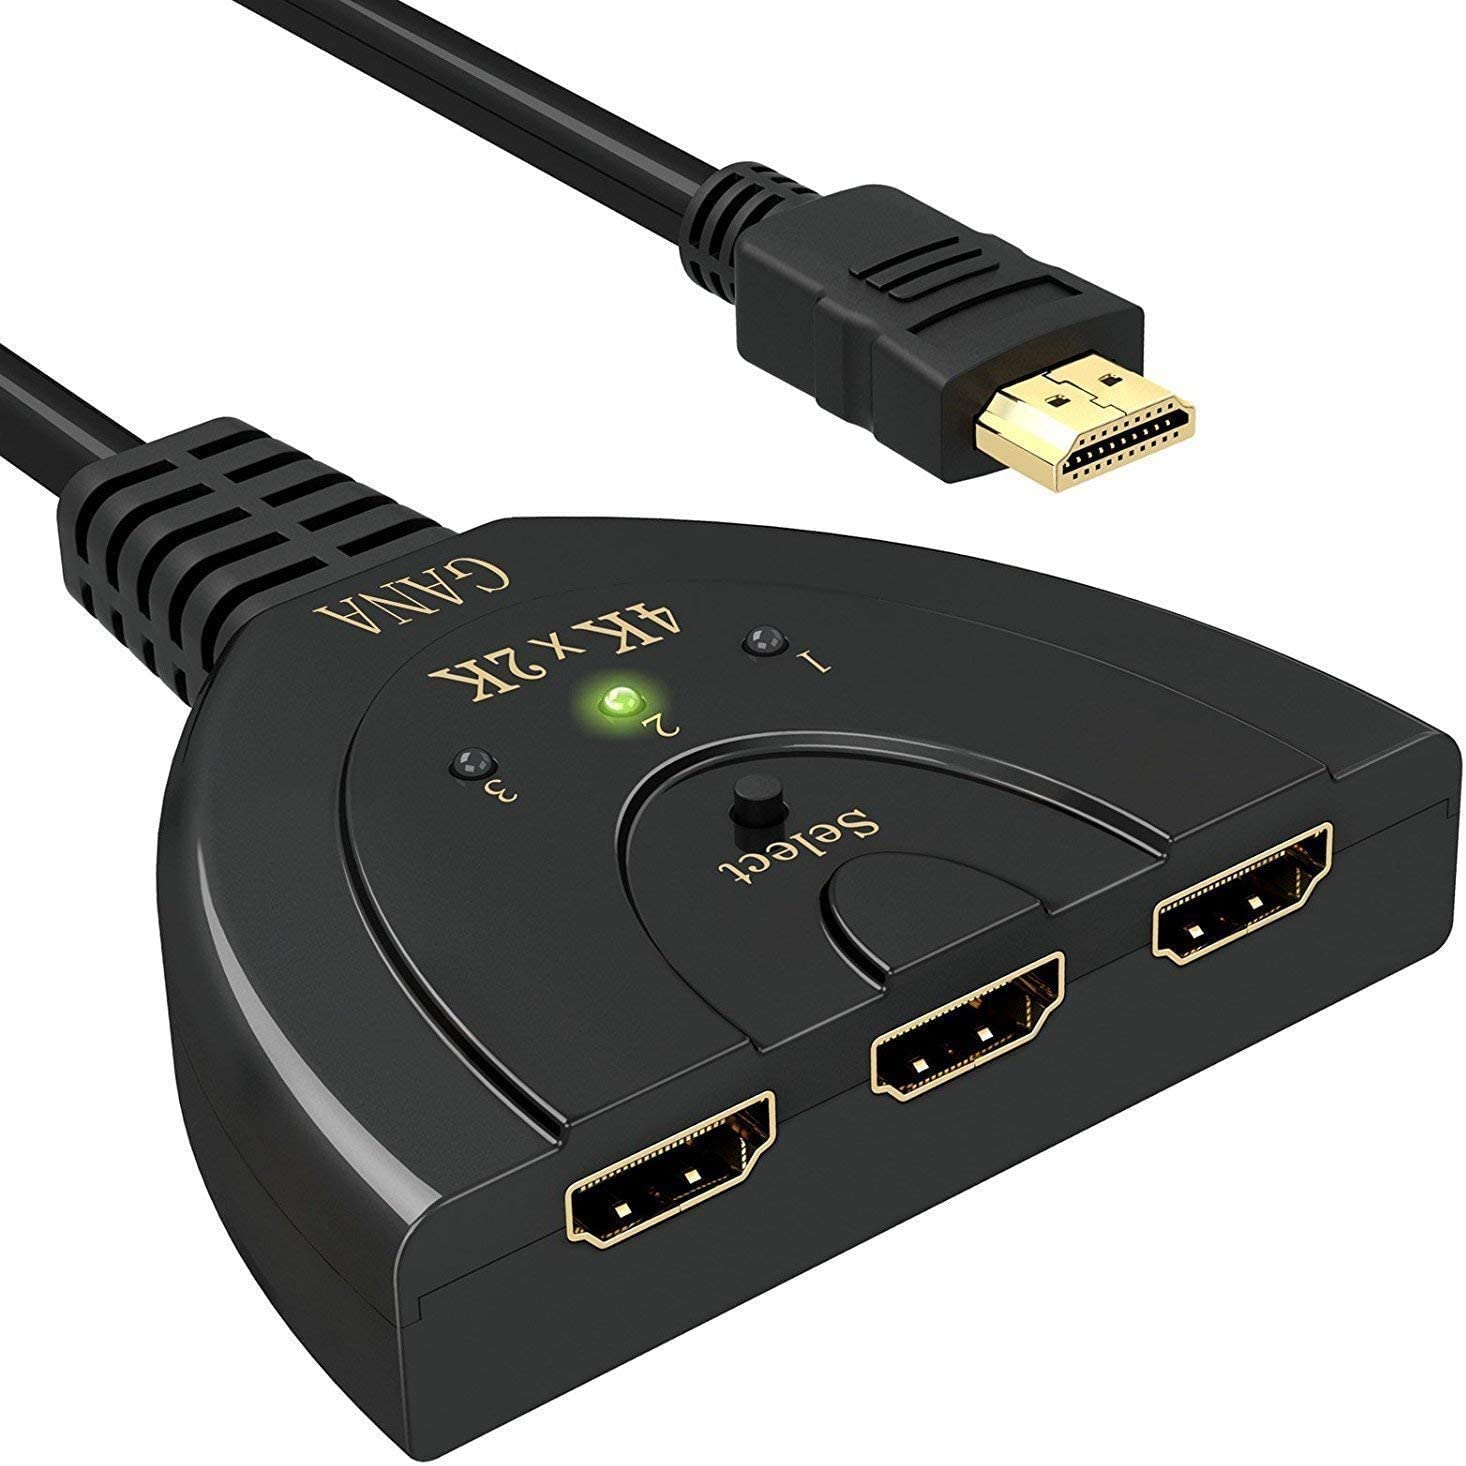 The Best HDMI Switch | Reviews, Ratings,